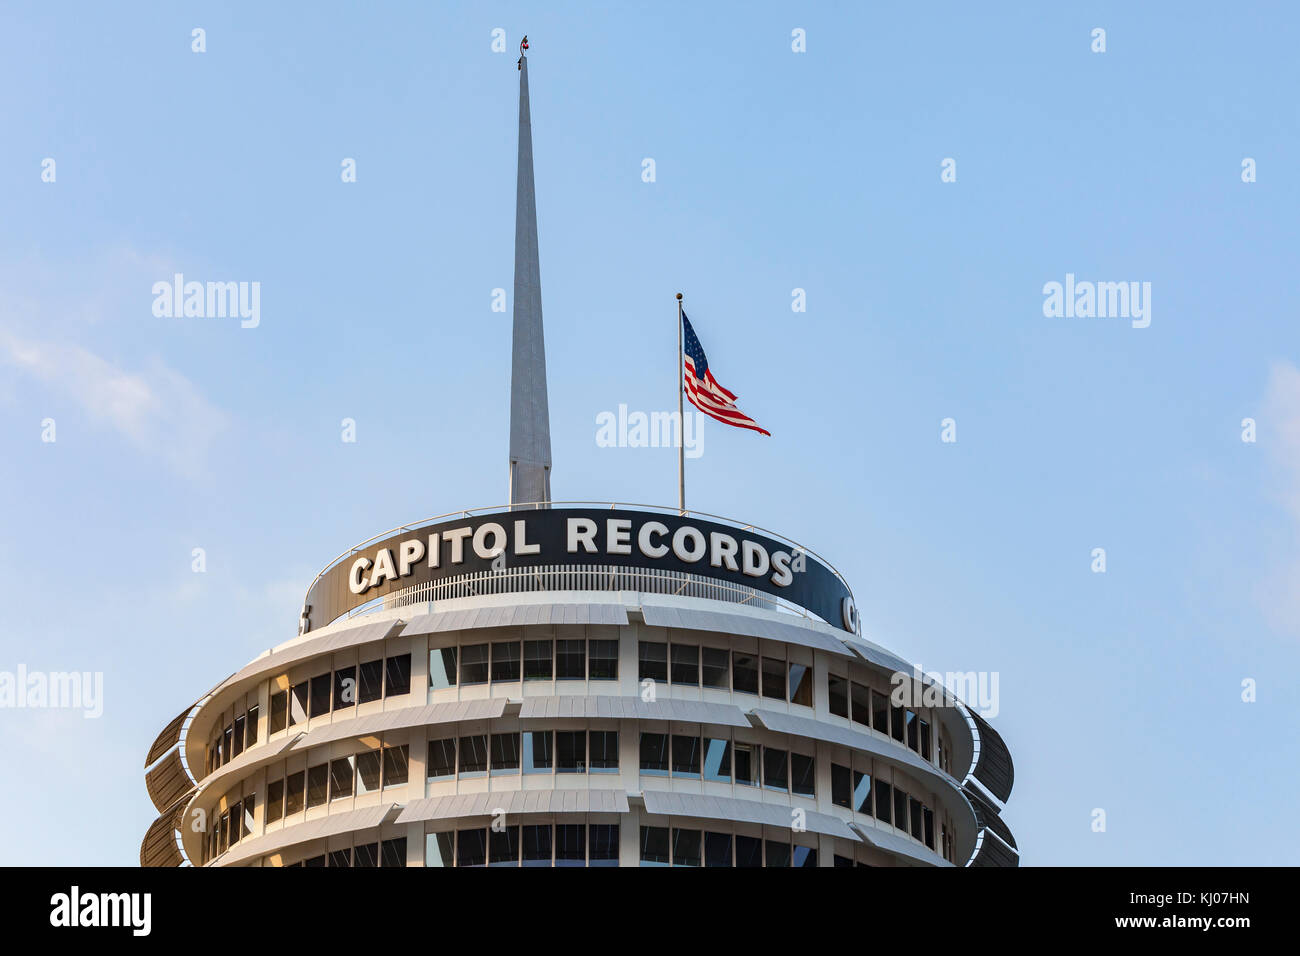 The Capitol Records Building, also known as the Capitol Records Tower, is a Hollywood Boulevard Commercial and Entertainment District building. Stock Photo